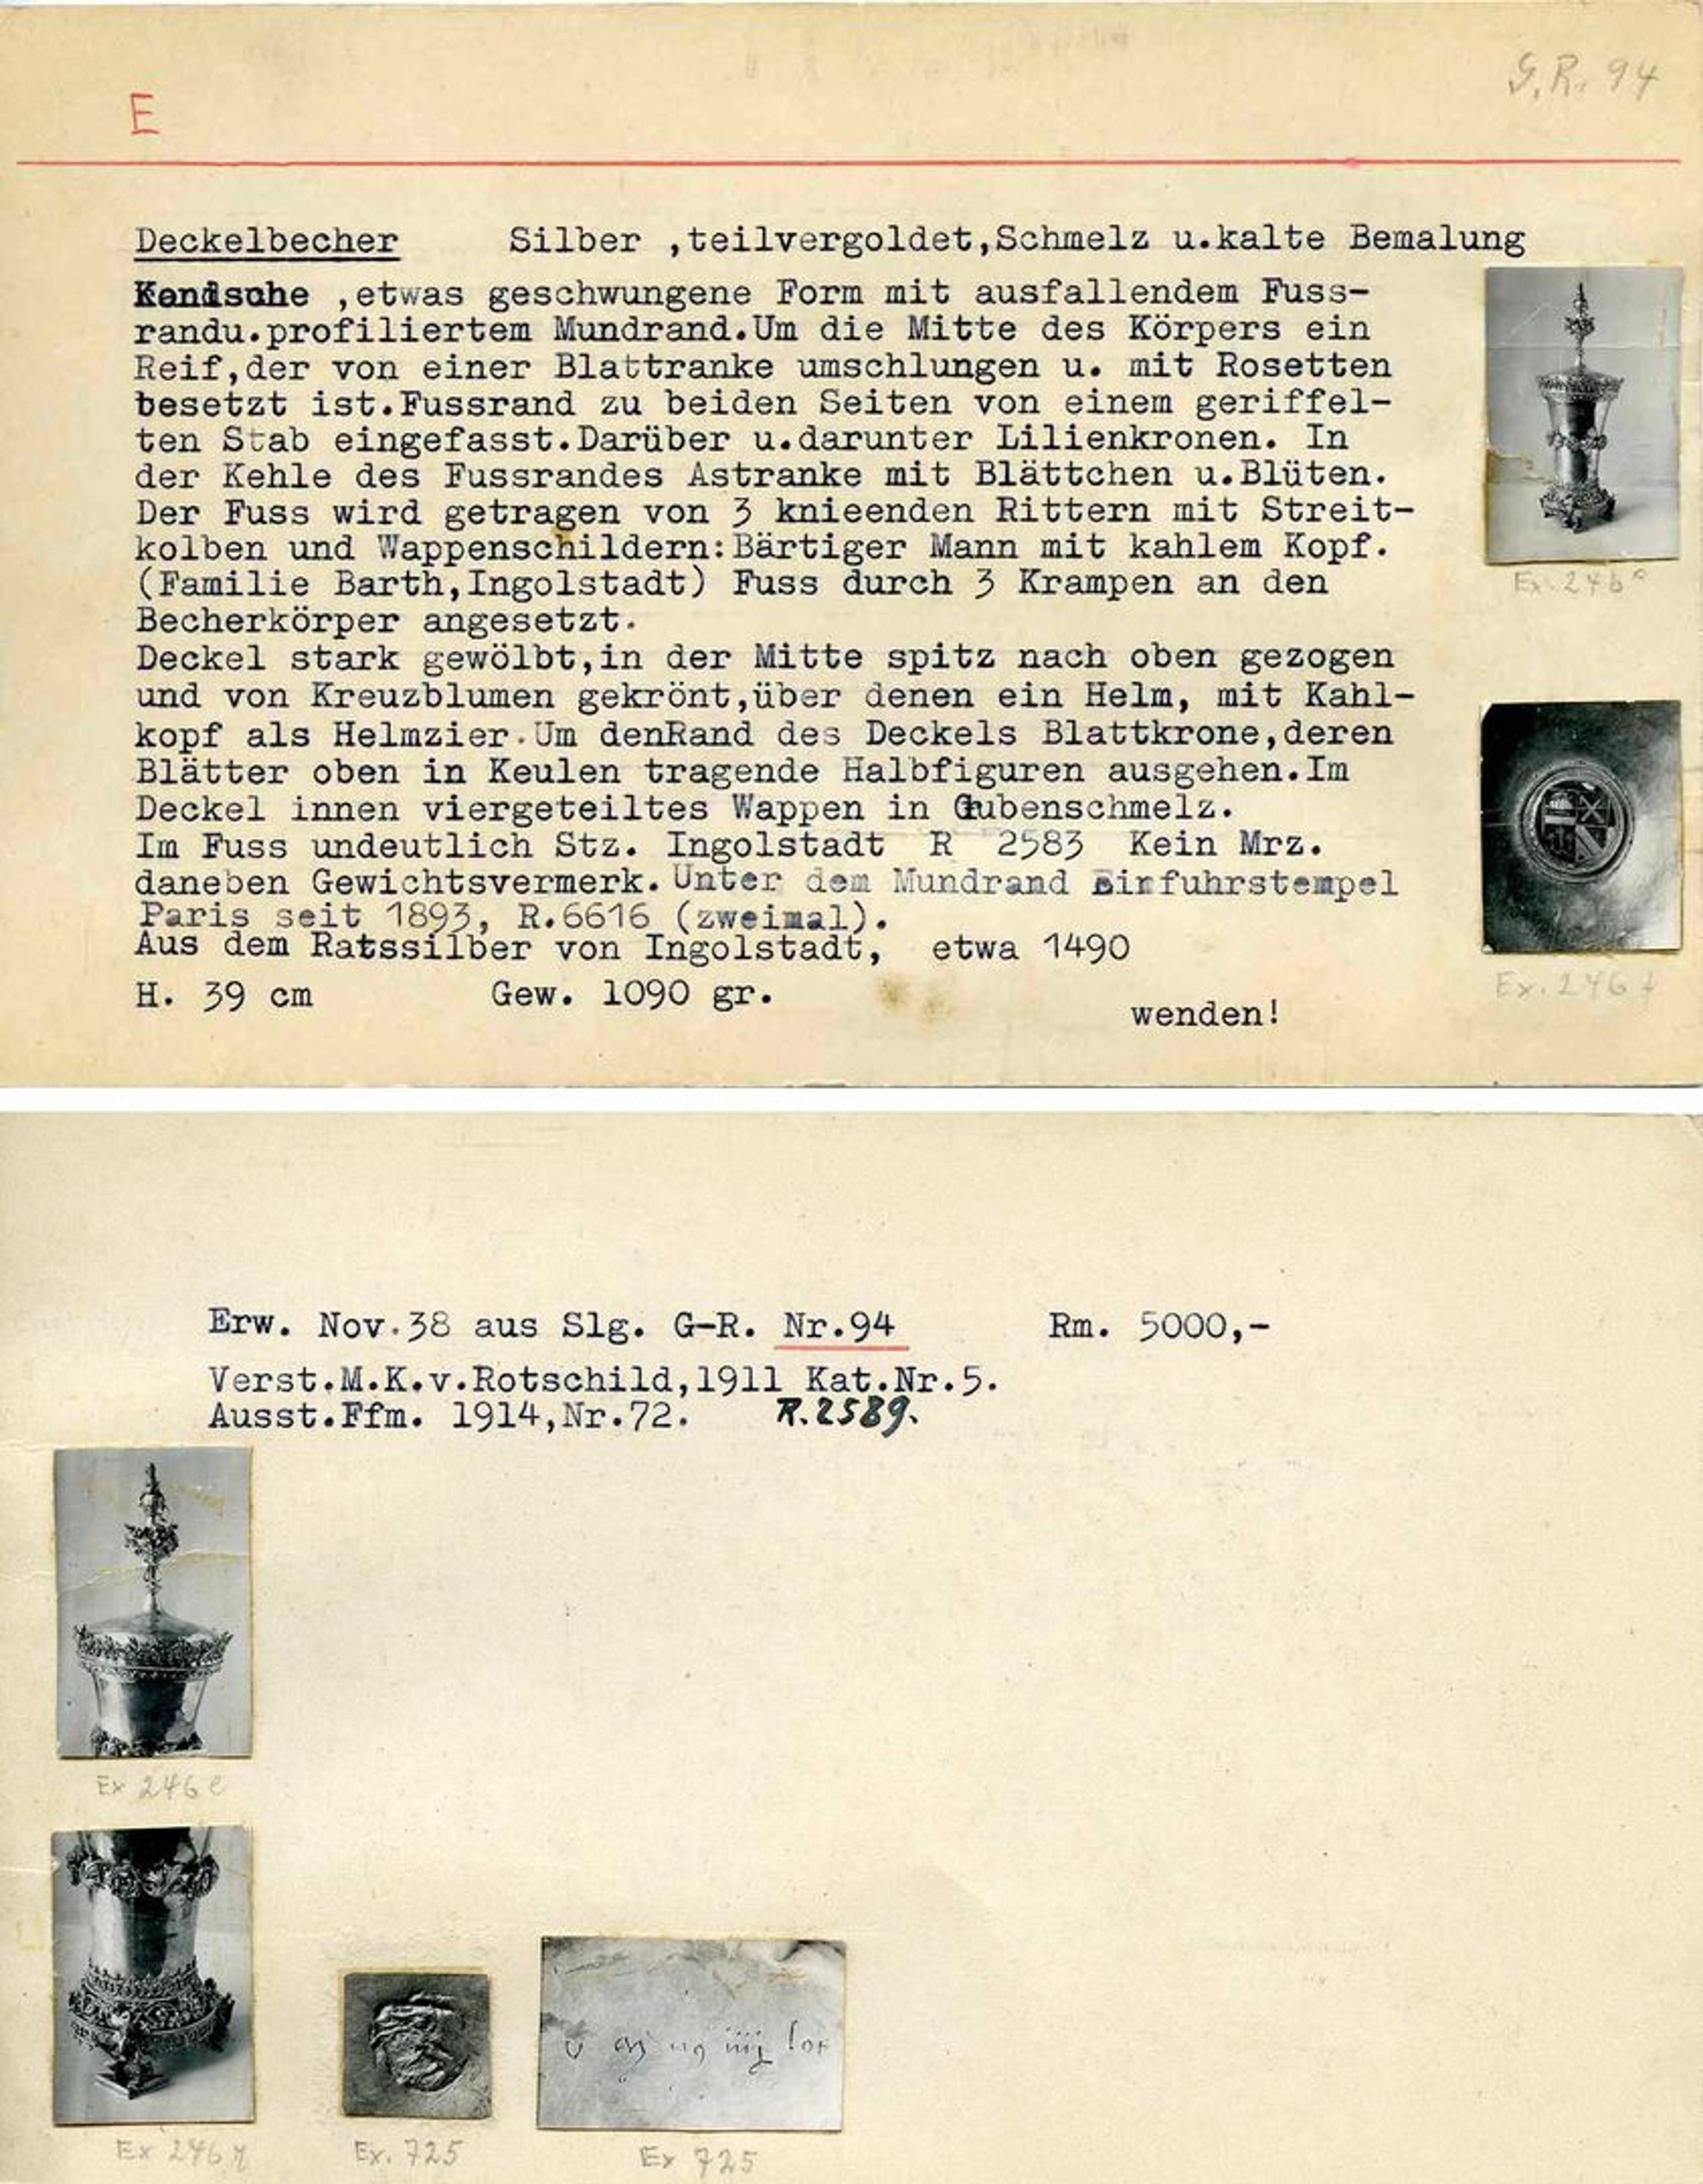 Front and back of an index card with typewriting on it. Small black-and-white photos of a medieval beaker are pasted on the card.